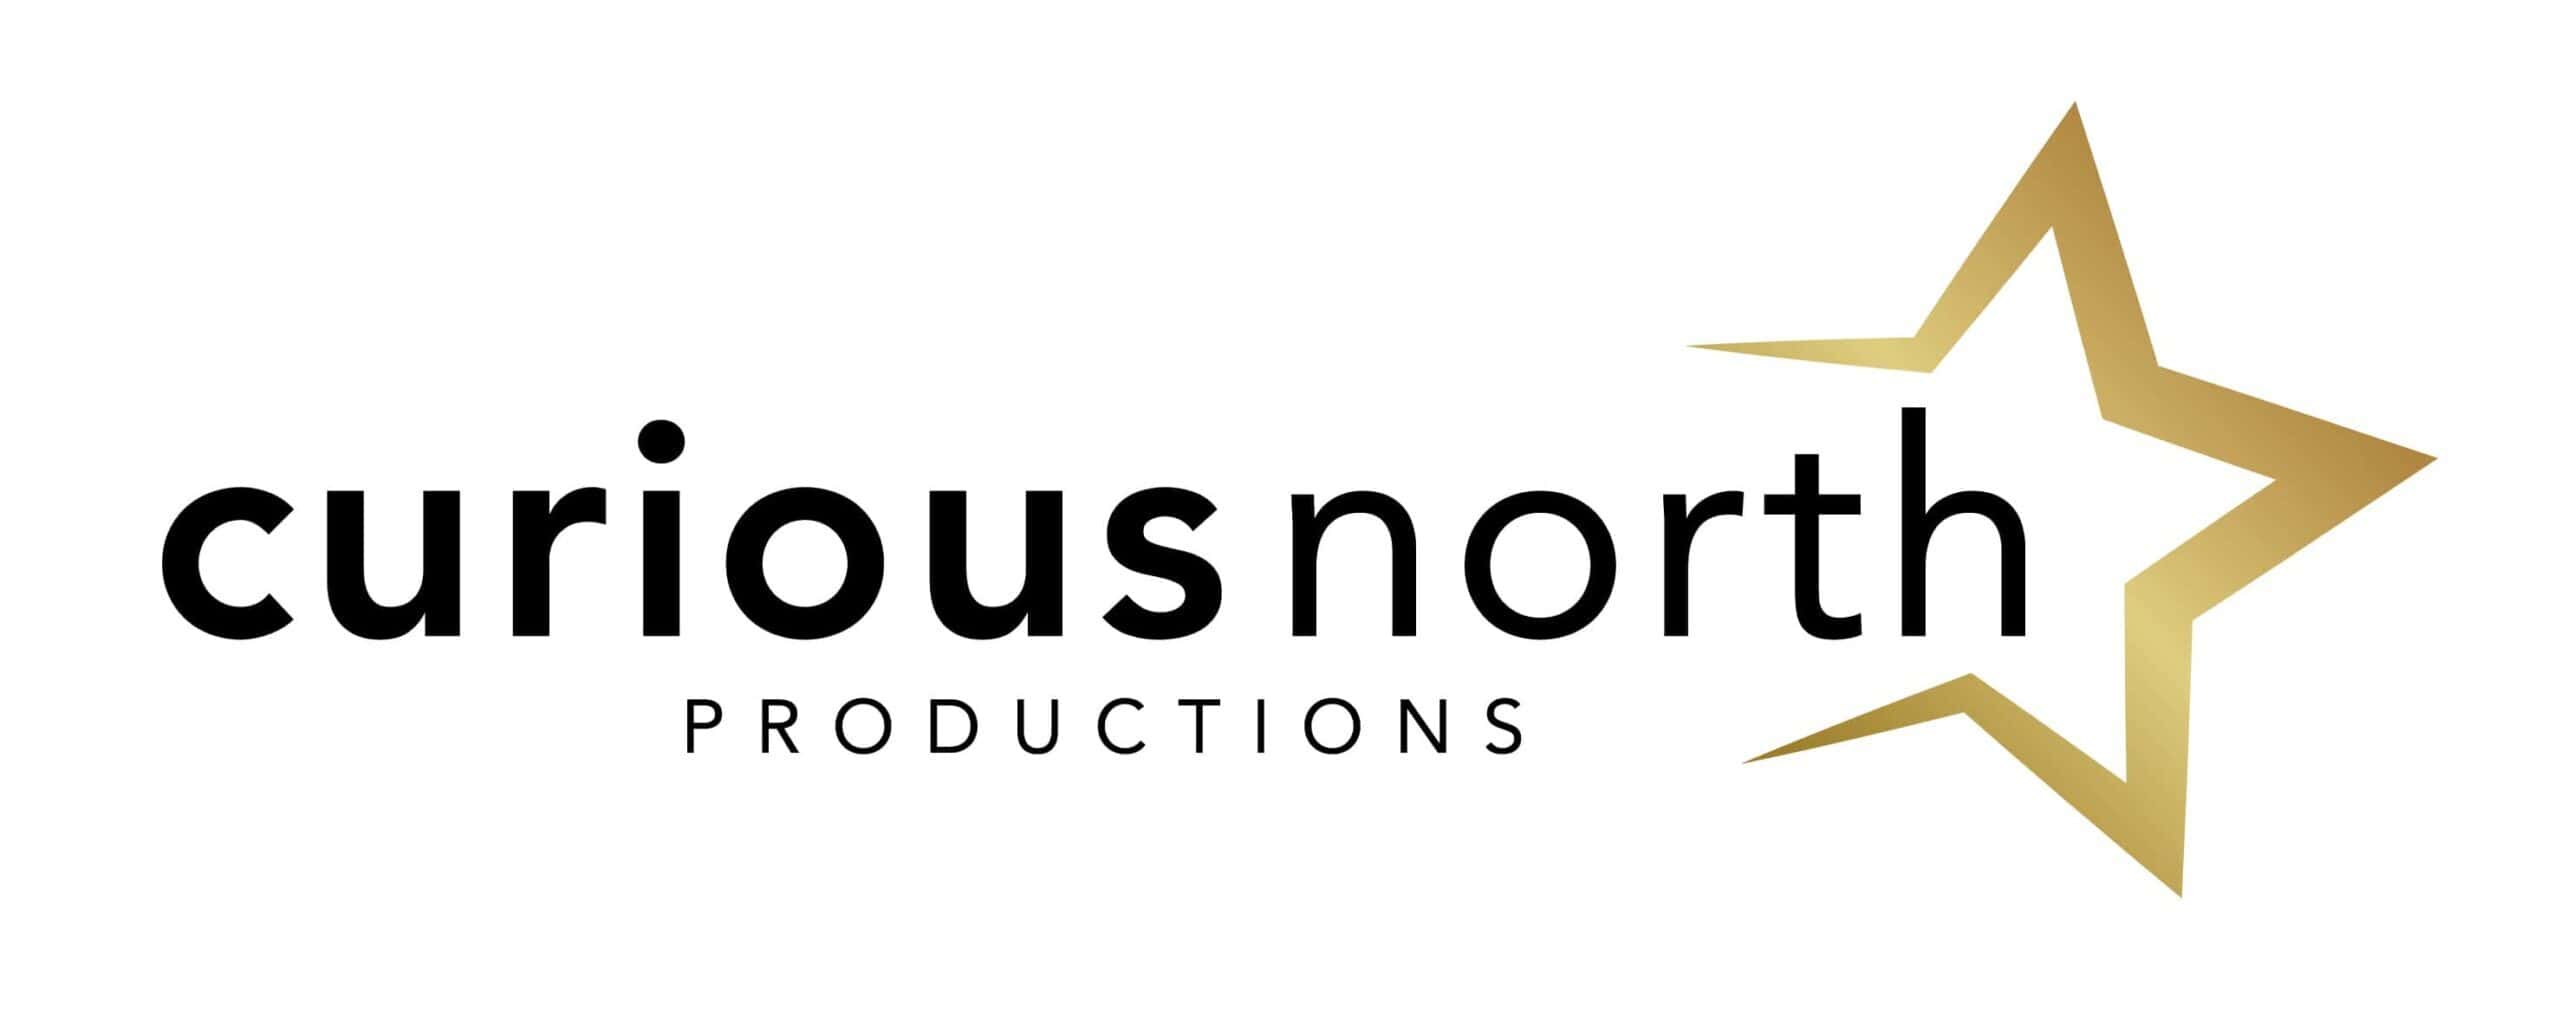 Curious North Productions logo